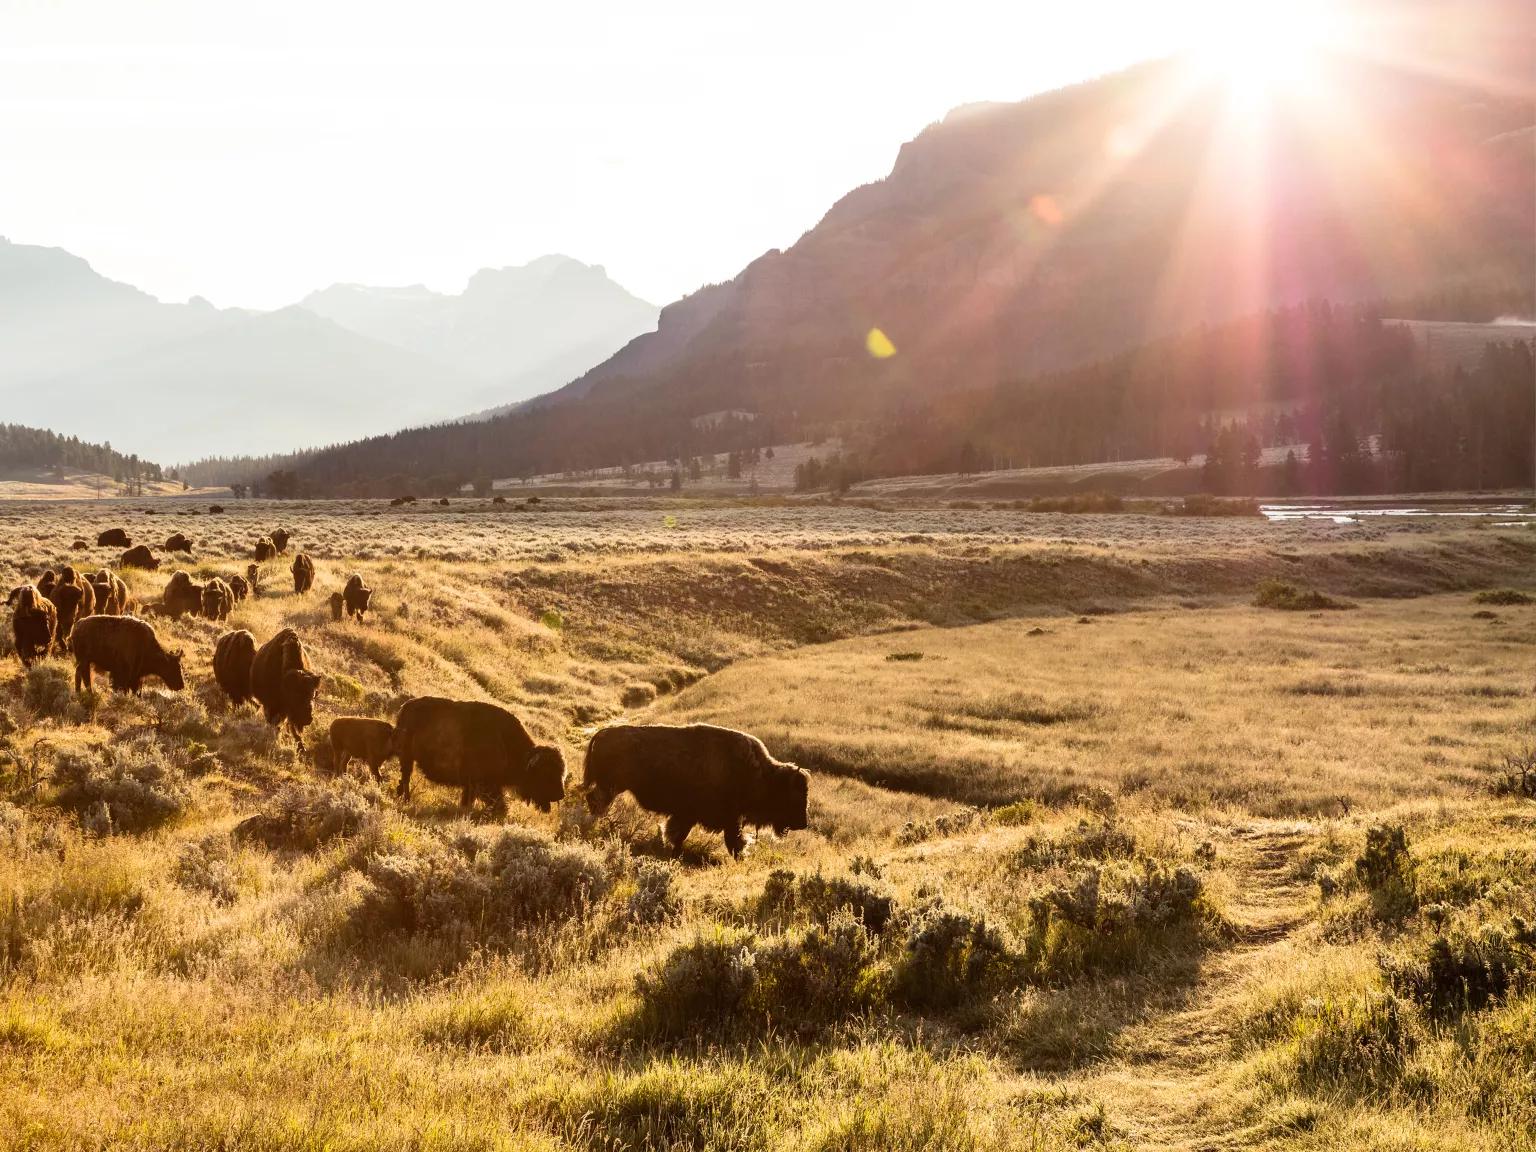 A herd of bison moves through a grassy valley in Yellowstone National Park